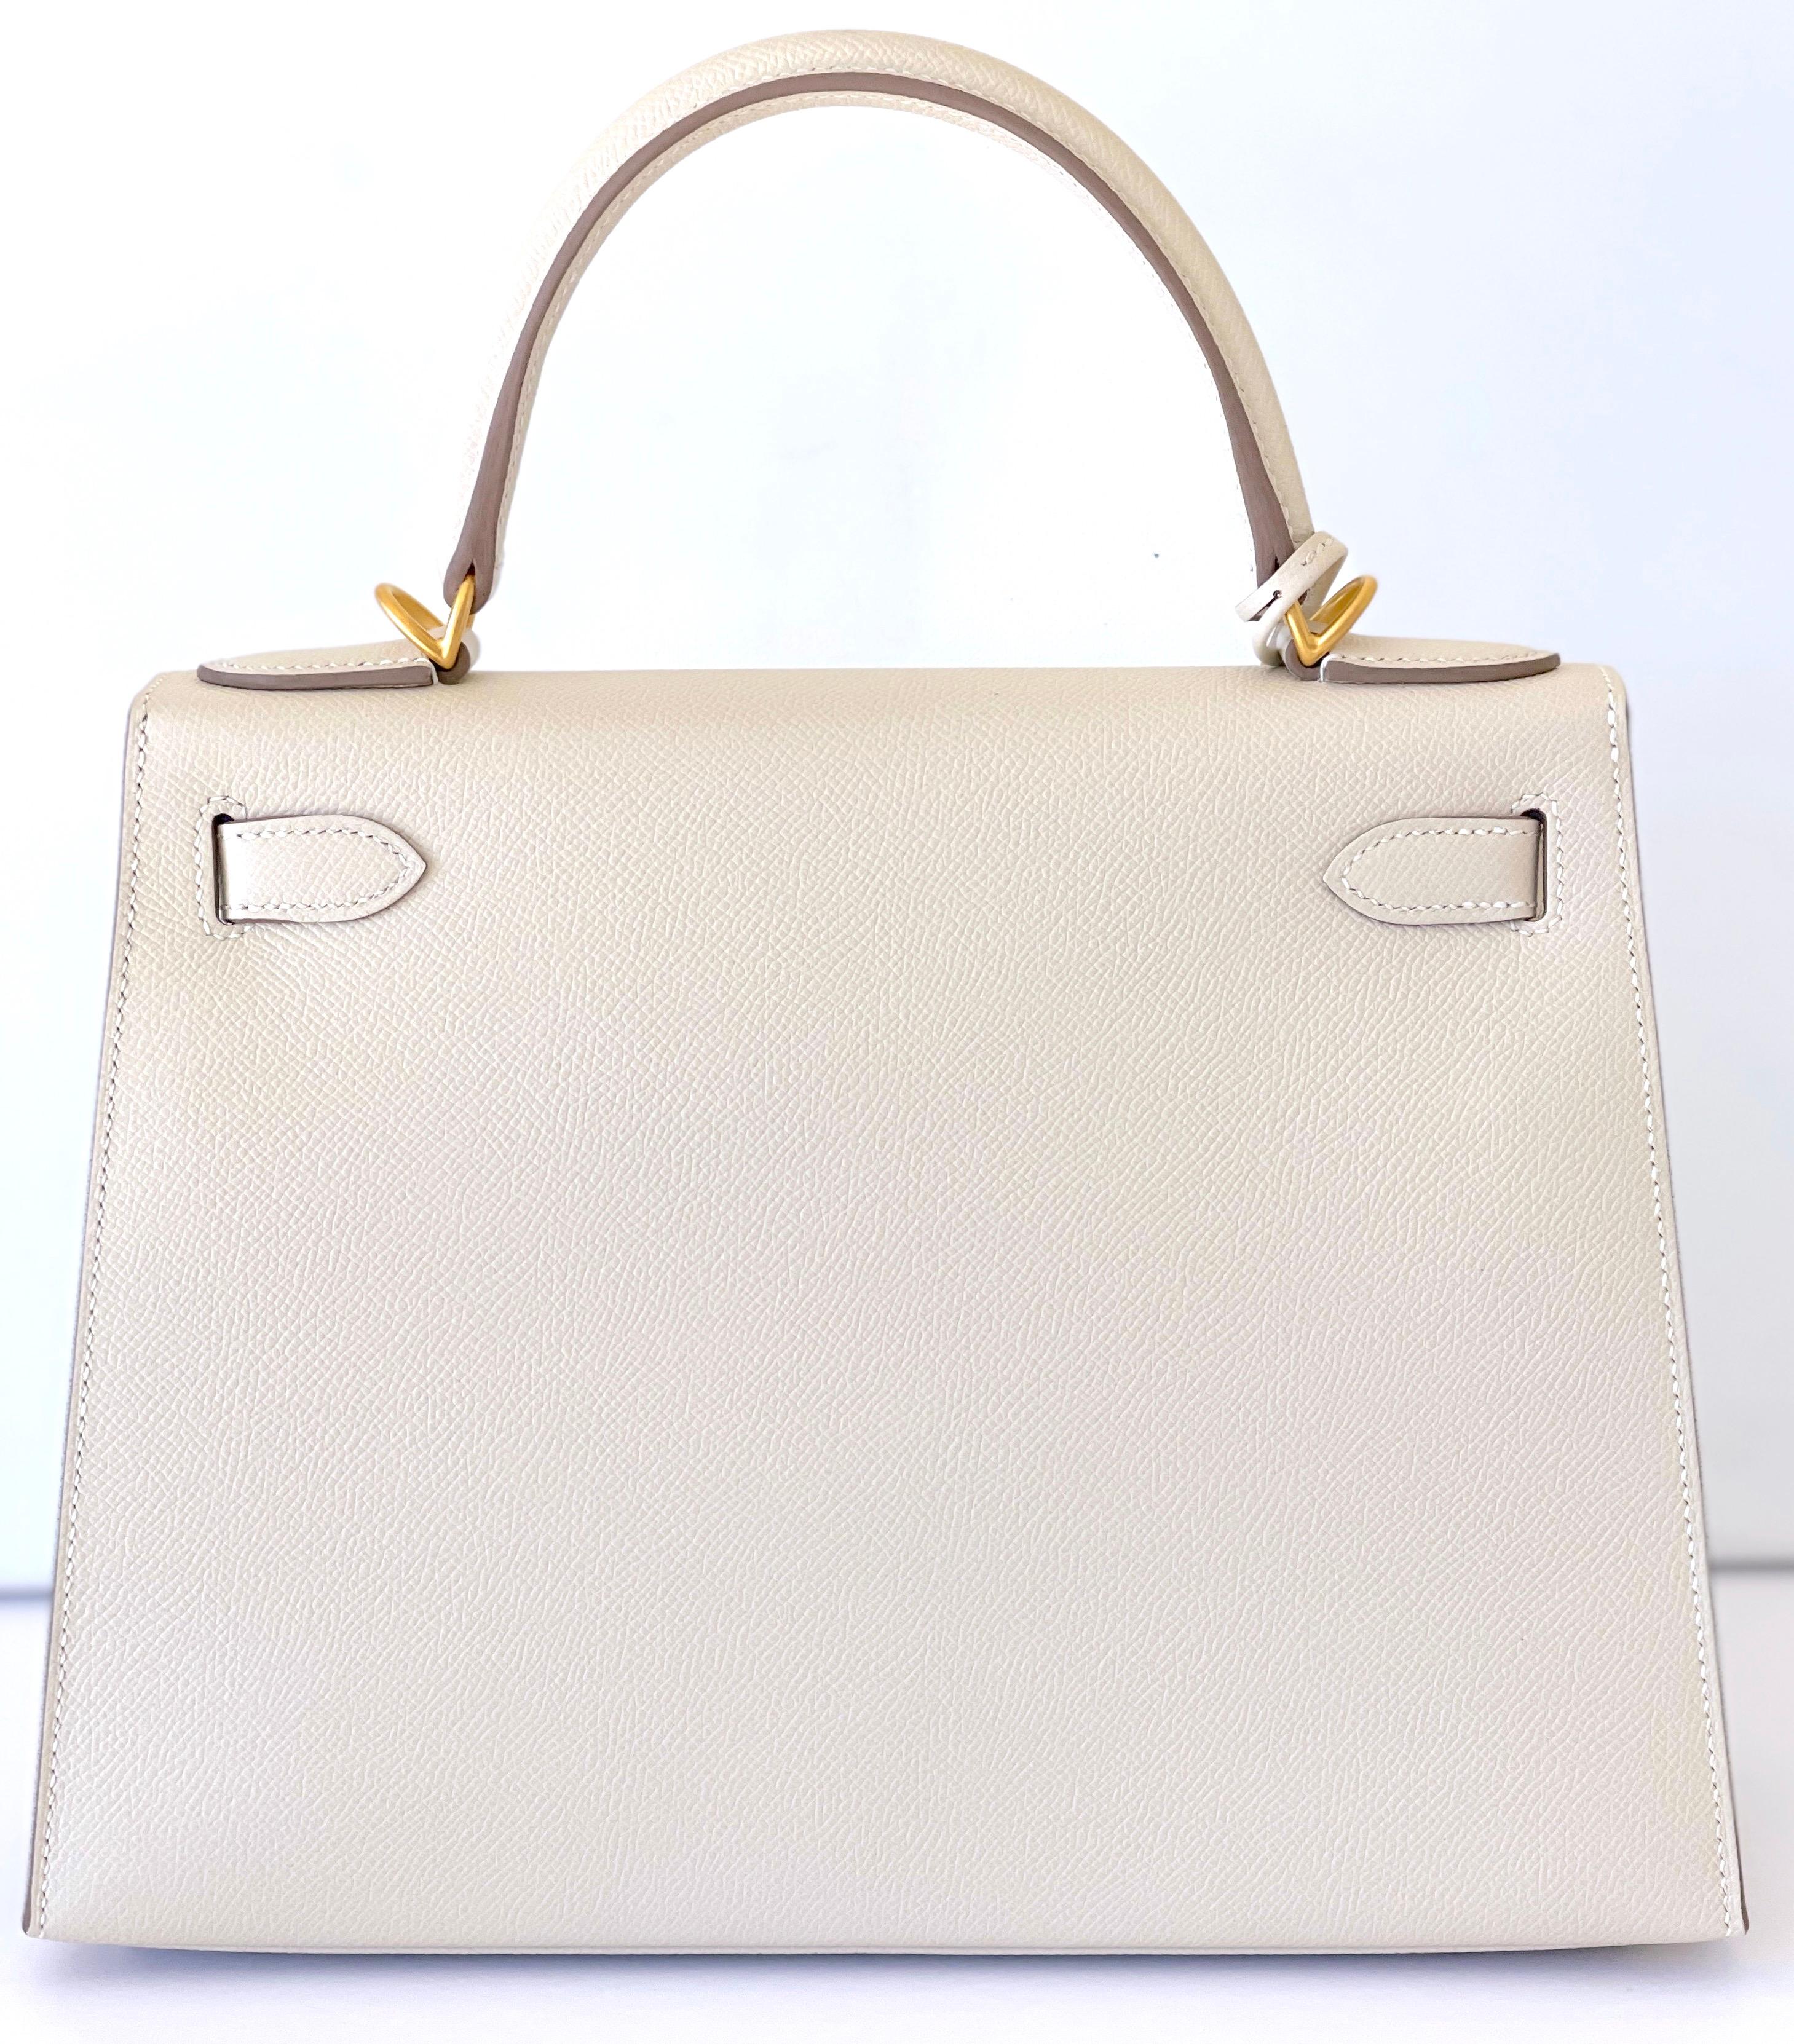 Hermes 28cm Kelly
Hermes Kelly 28cm

Neutral color Craie, a creamy off white
Epsom sellier 
This was a special VIP ORDERED bag
It is stamped with a horseshoe , indicating special order
The hardware is Brushed Gold
Elegance defined
The combination of